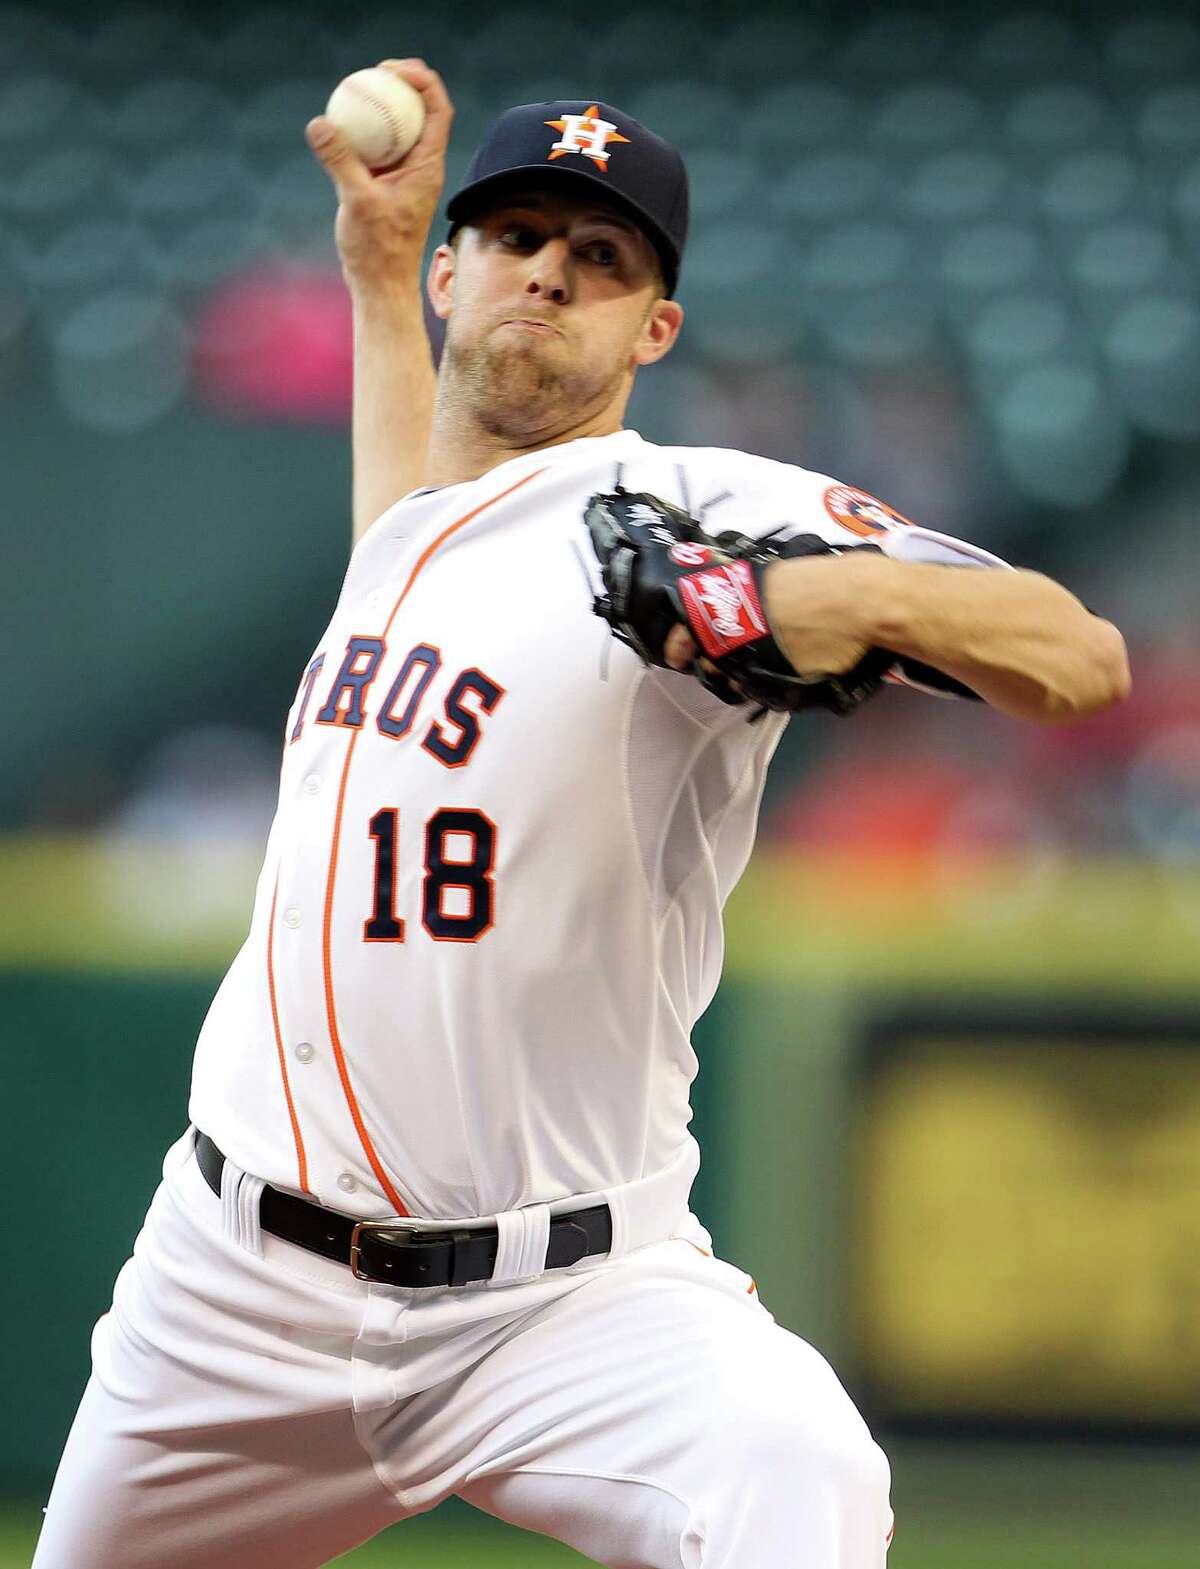 Houston Astros starting pitcher Jordan Lyles (18) pitches during the first inning of an MLB game at Minute Maid Park, dow}, May 7, 2013, in Houston. ( Karen Warren / Houston Chronicle )